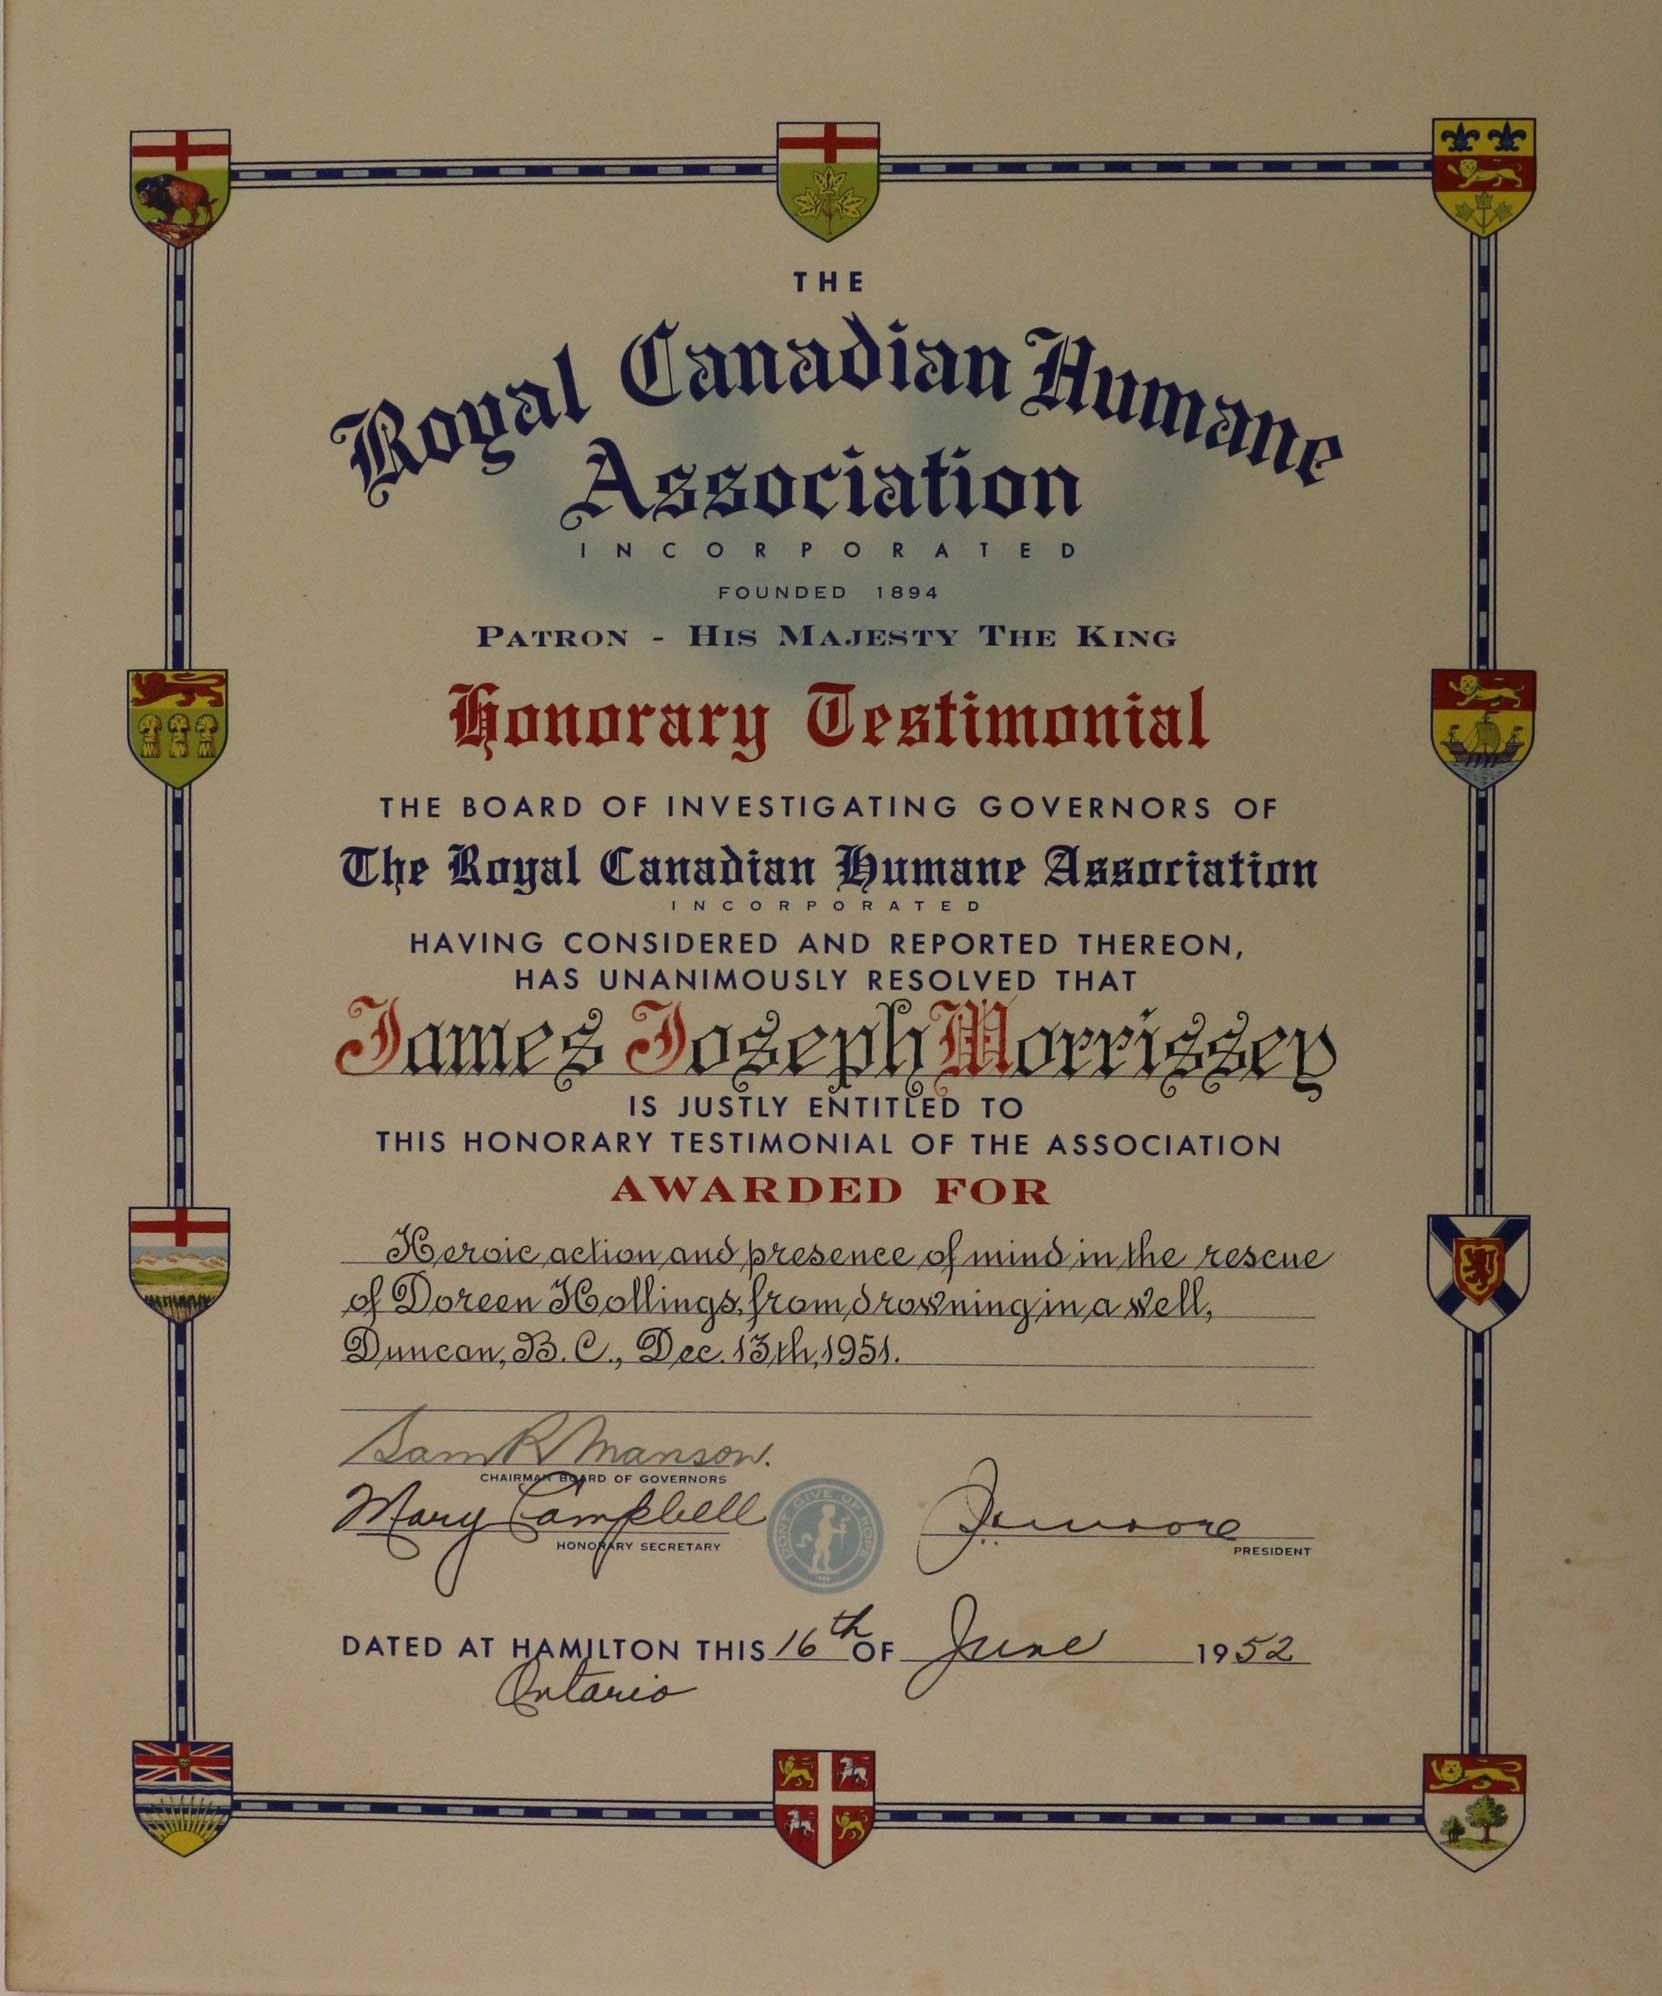 Certificate awarded to James Joseph Morrissey for "Heroic action and presence of mind" in the attempted rescue of a 5 year old girl who fell down a well in 1951 (courtesy of Cowichan Valley Museum & Archives)